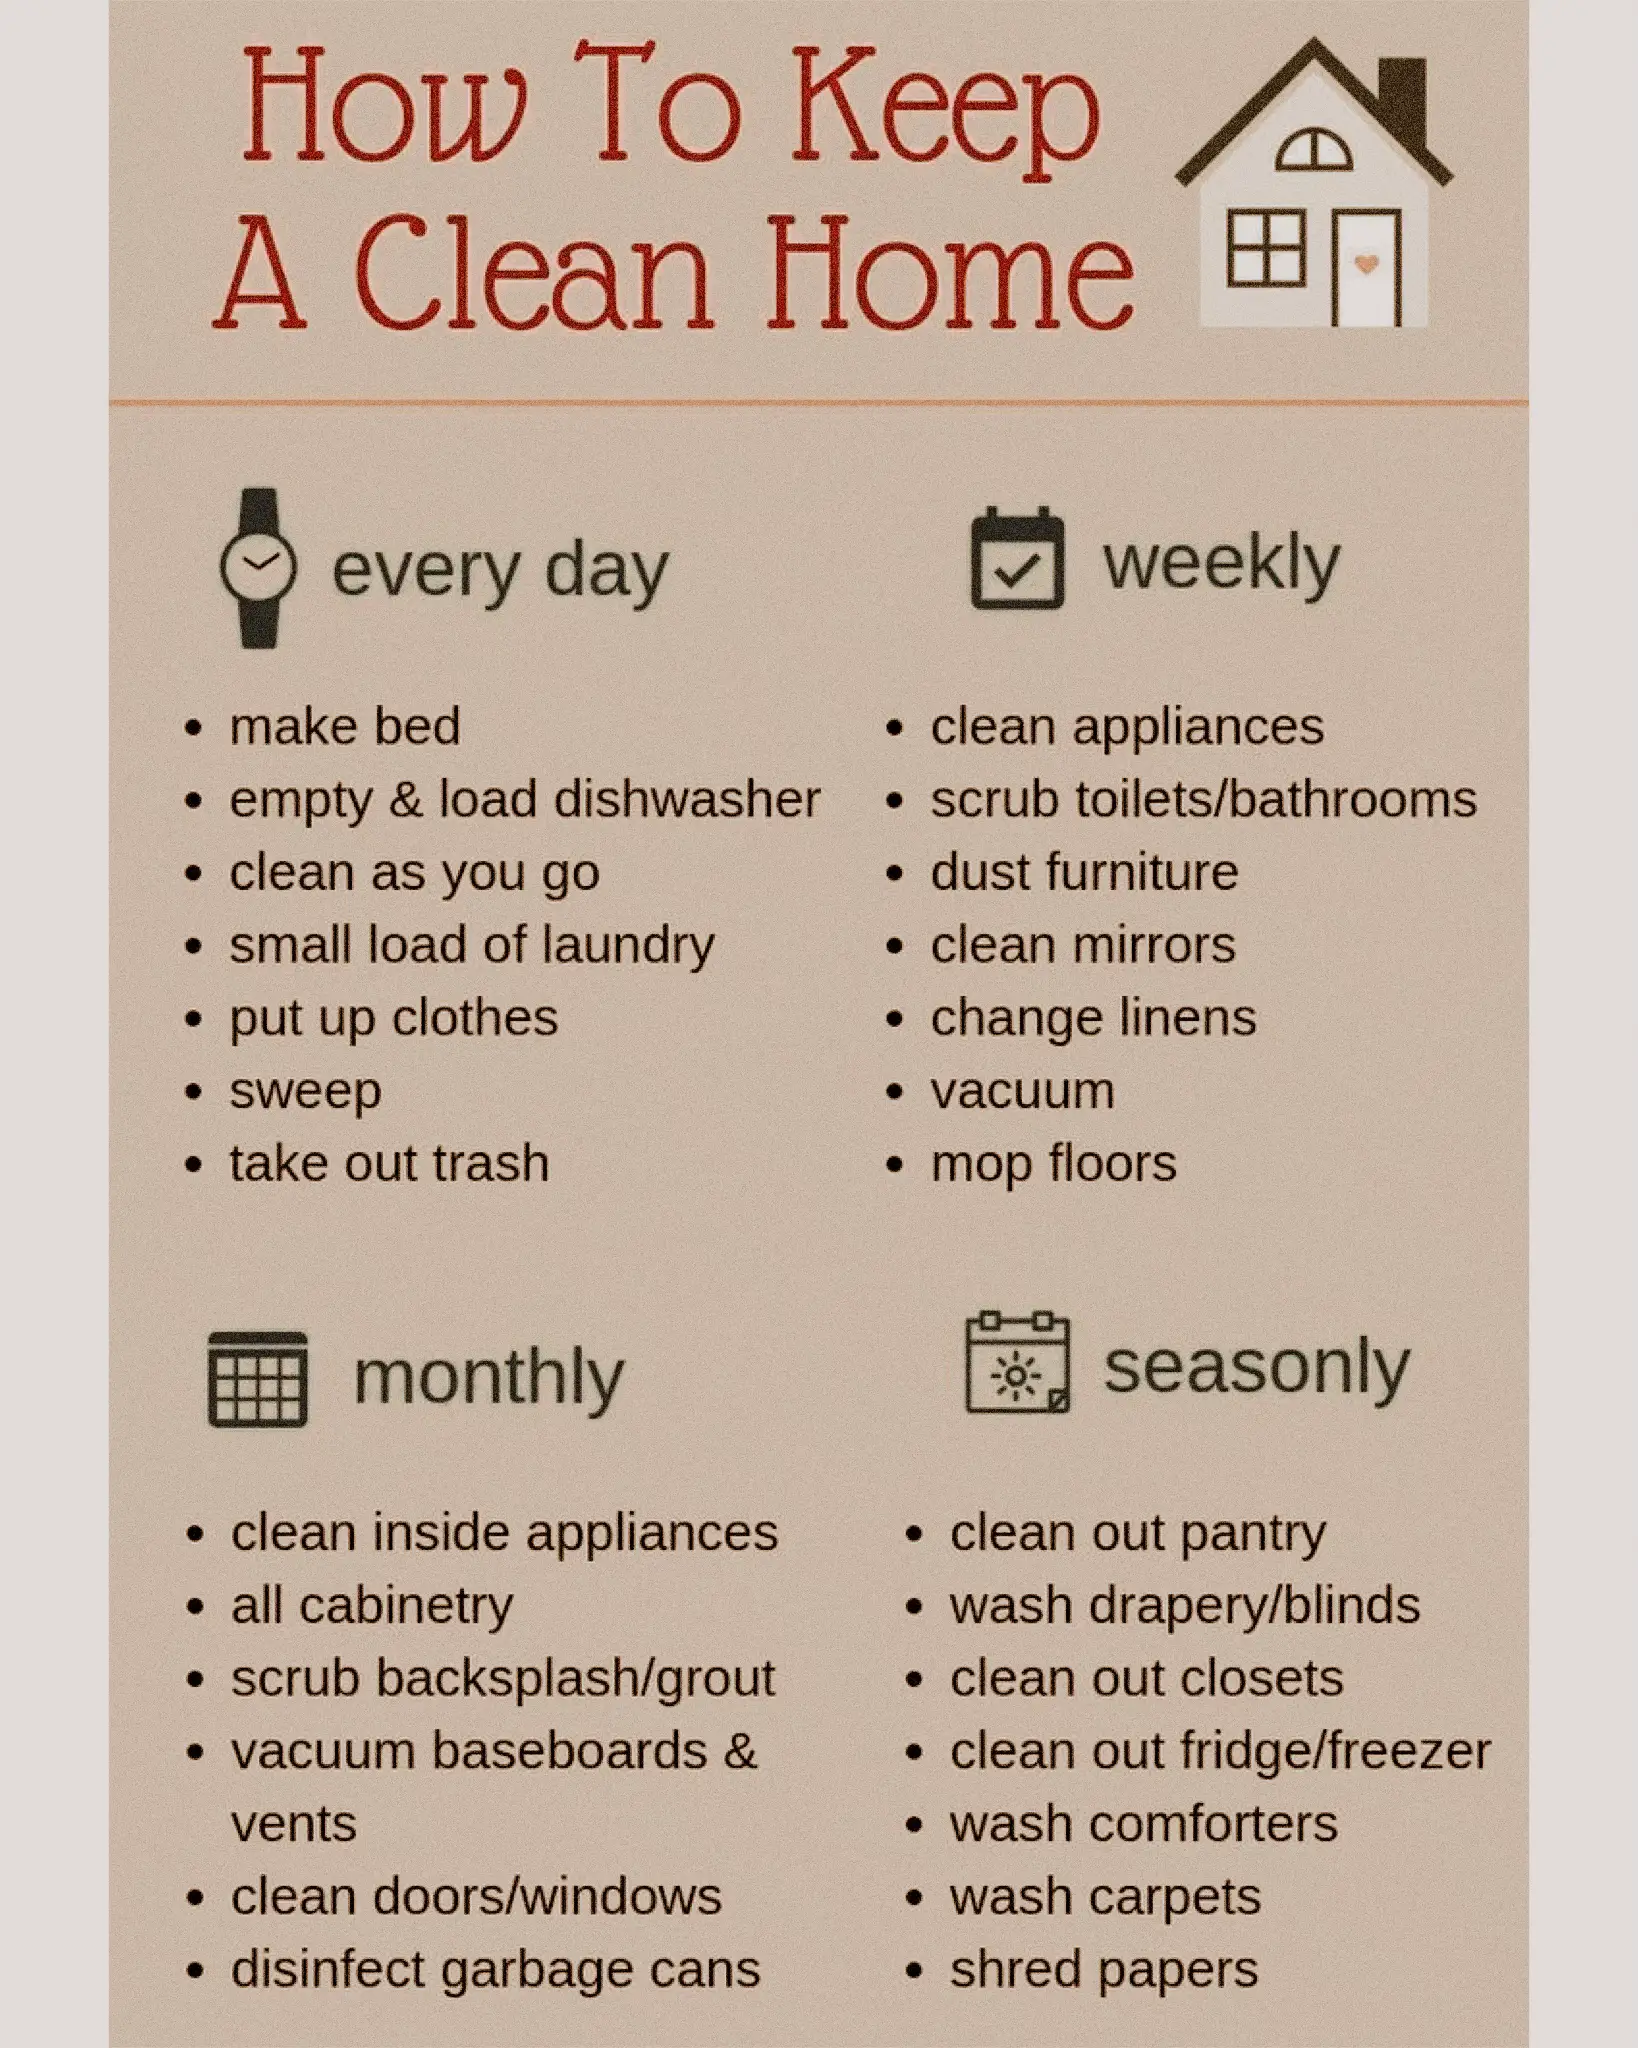  A list of cleaning tasks for a household.